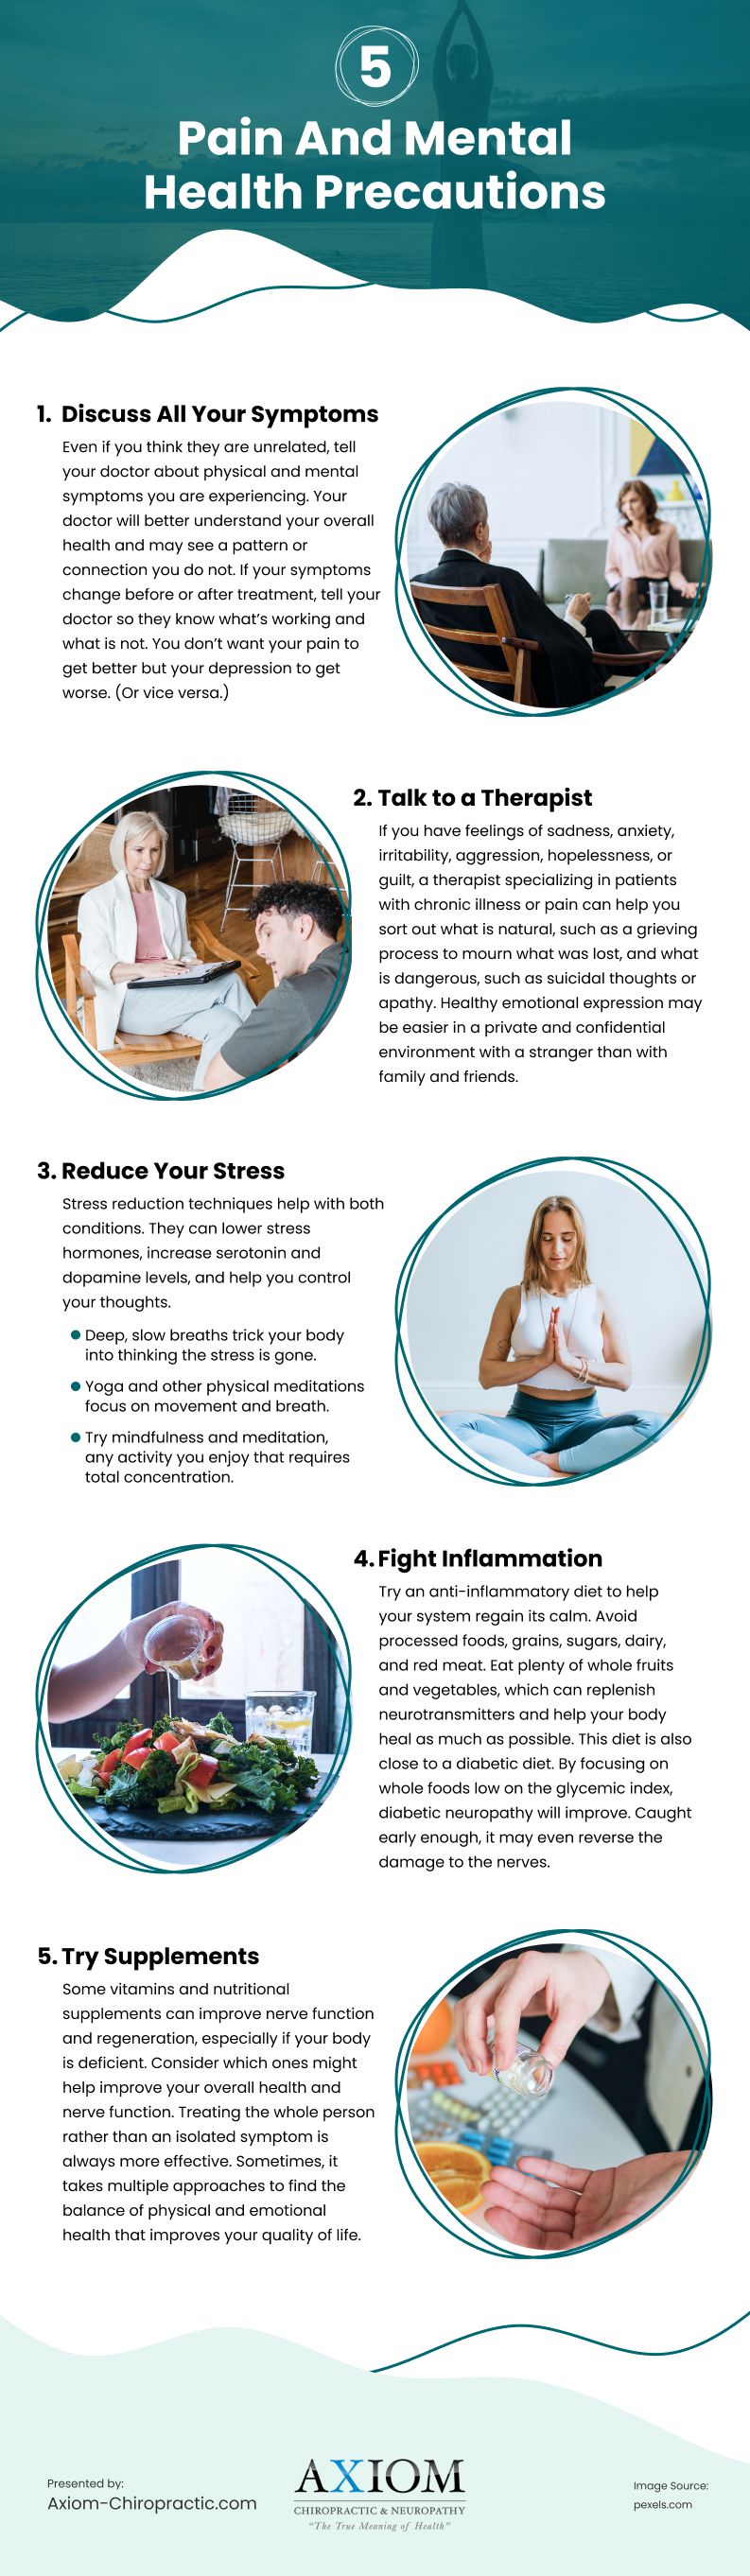 5 Pain and Mental Health Precautions Infographic